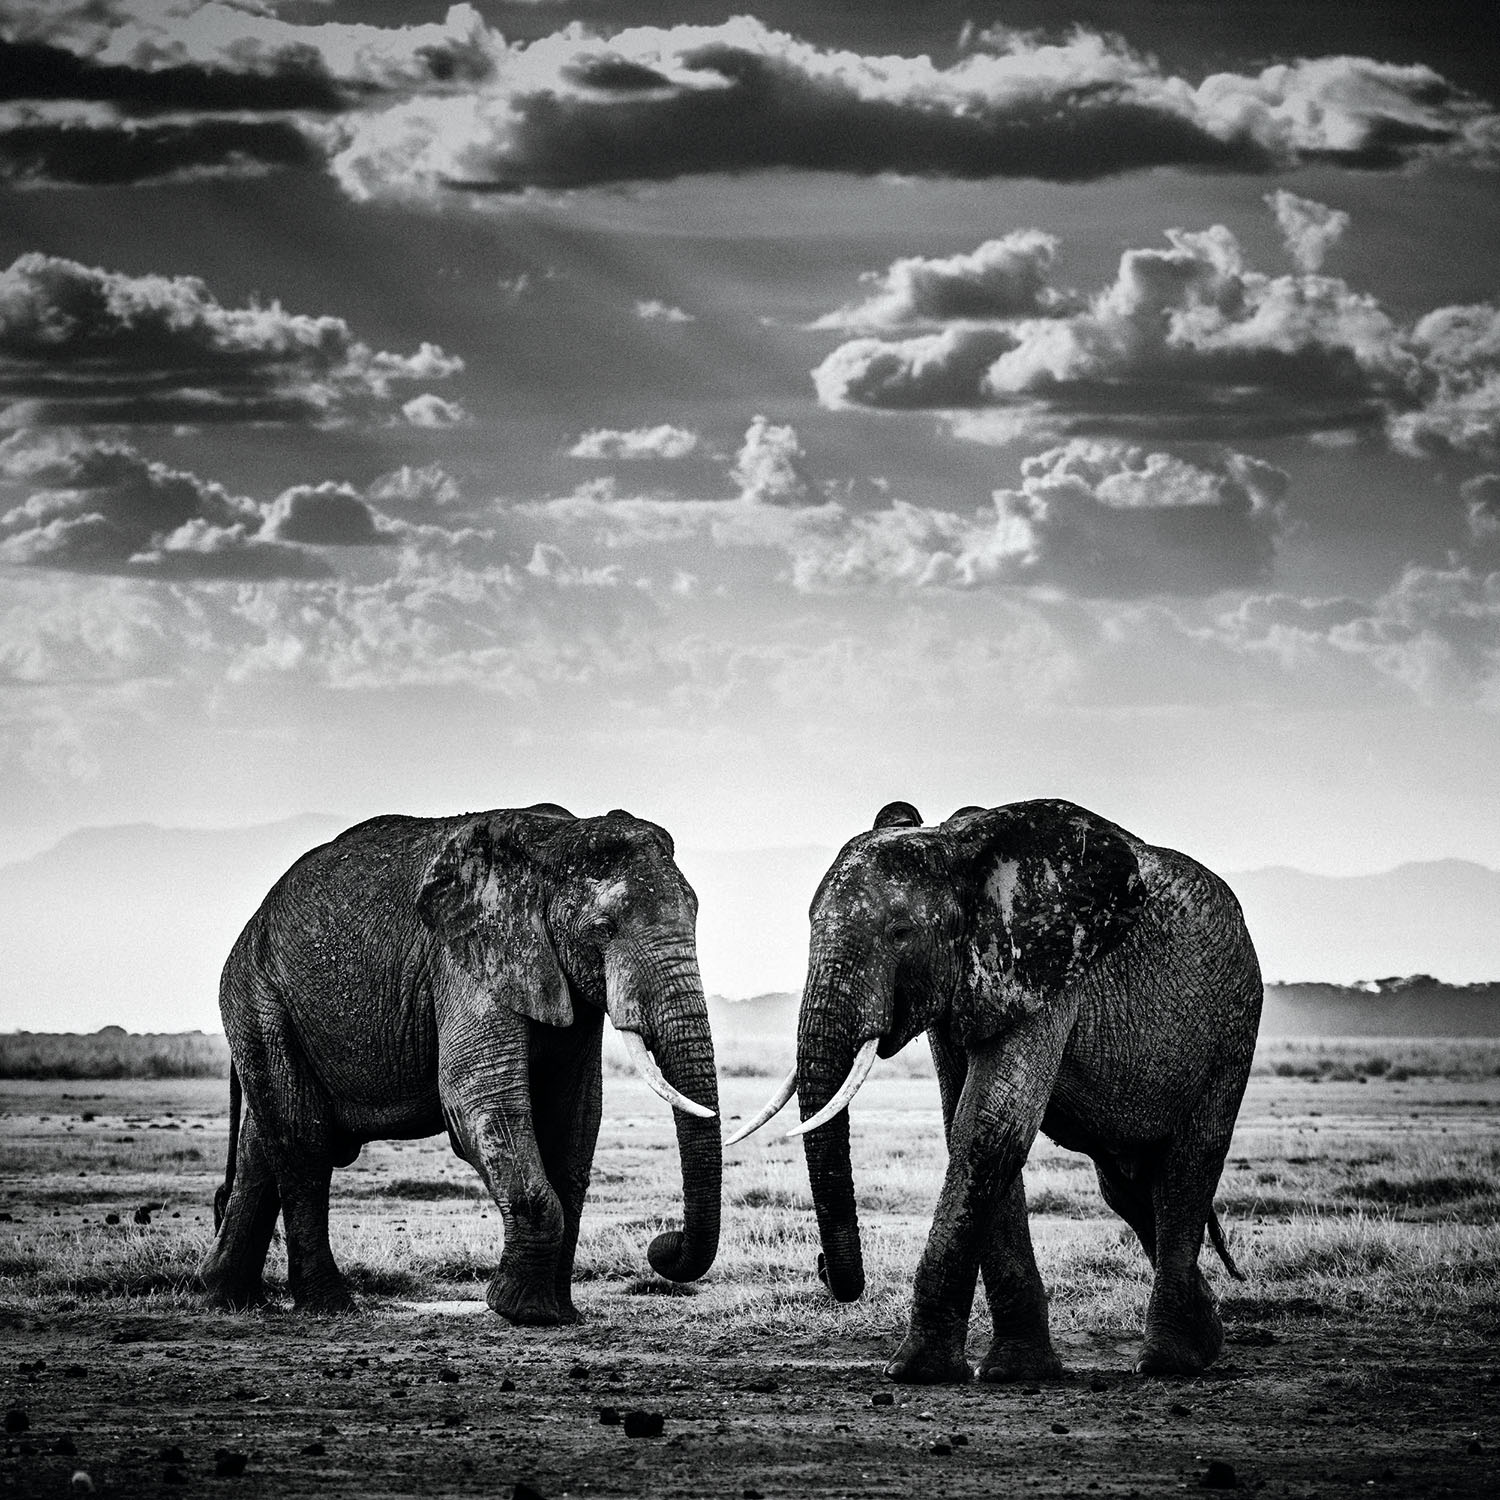 The Family Album of Wild Africa; Elephant - The Road is Closed